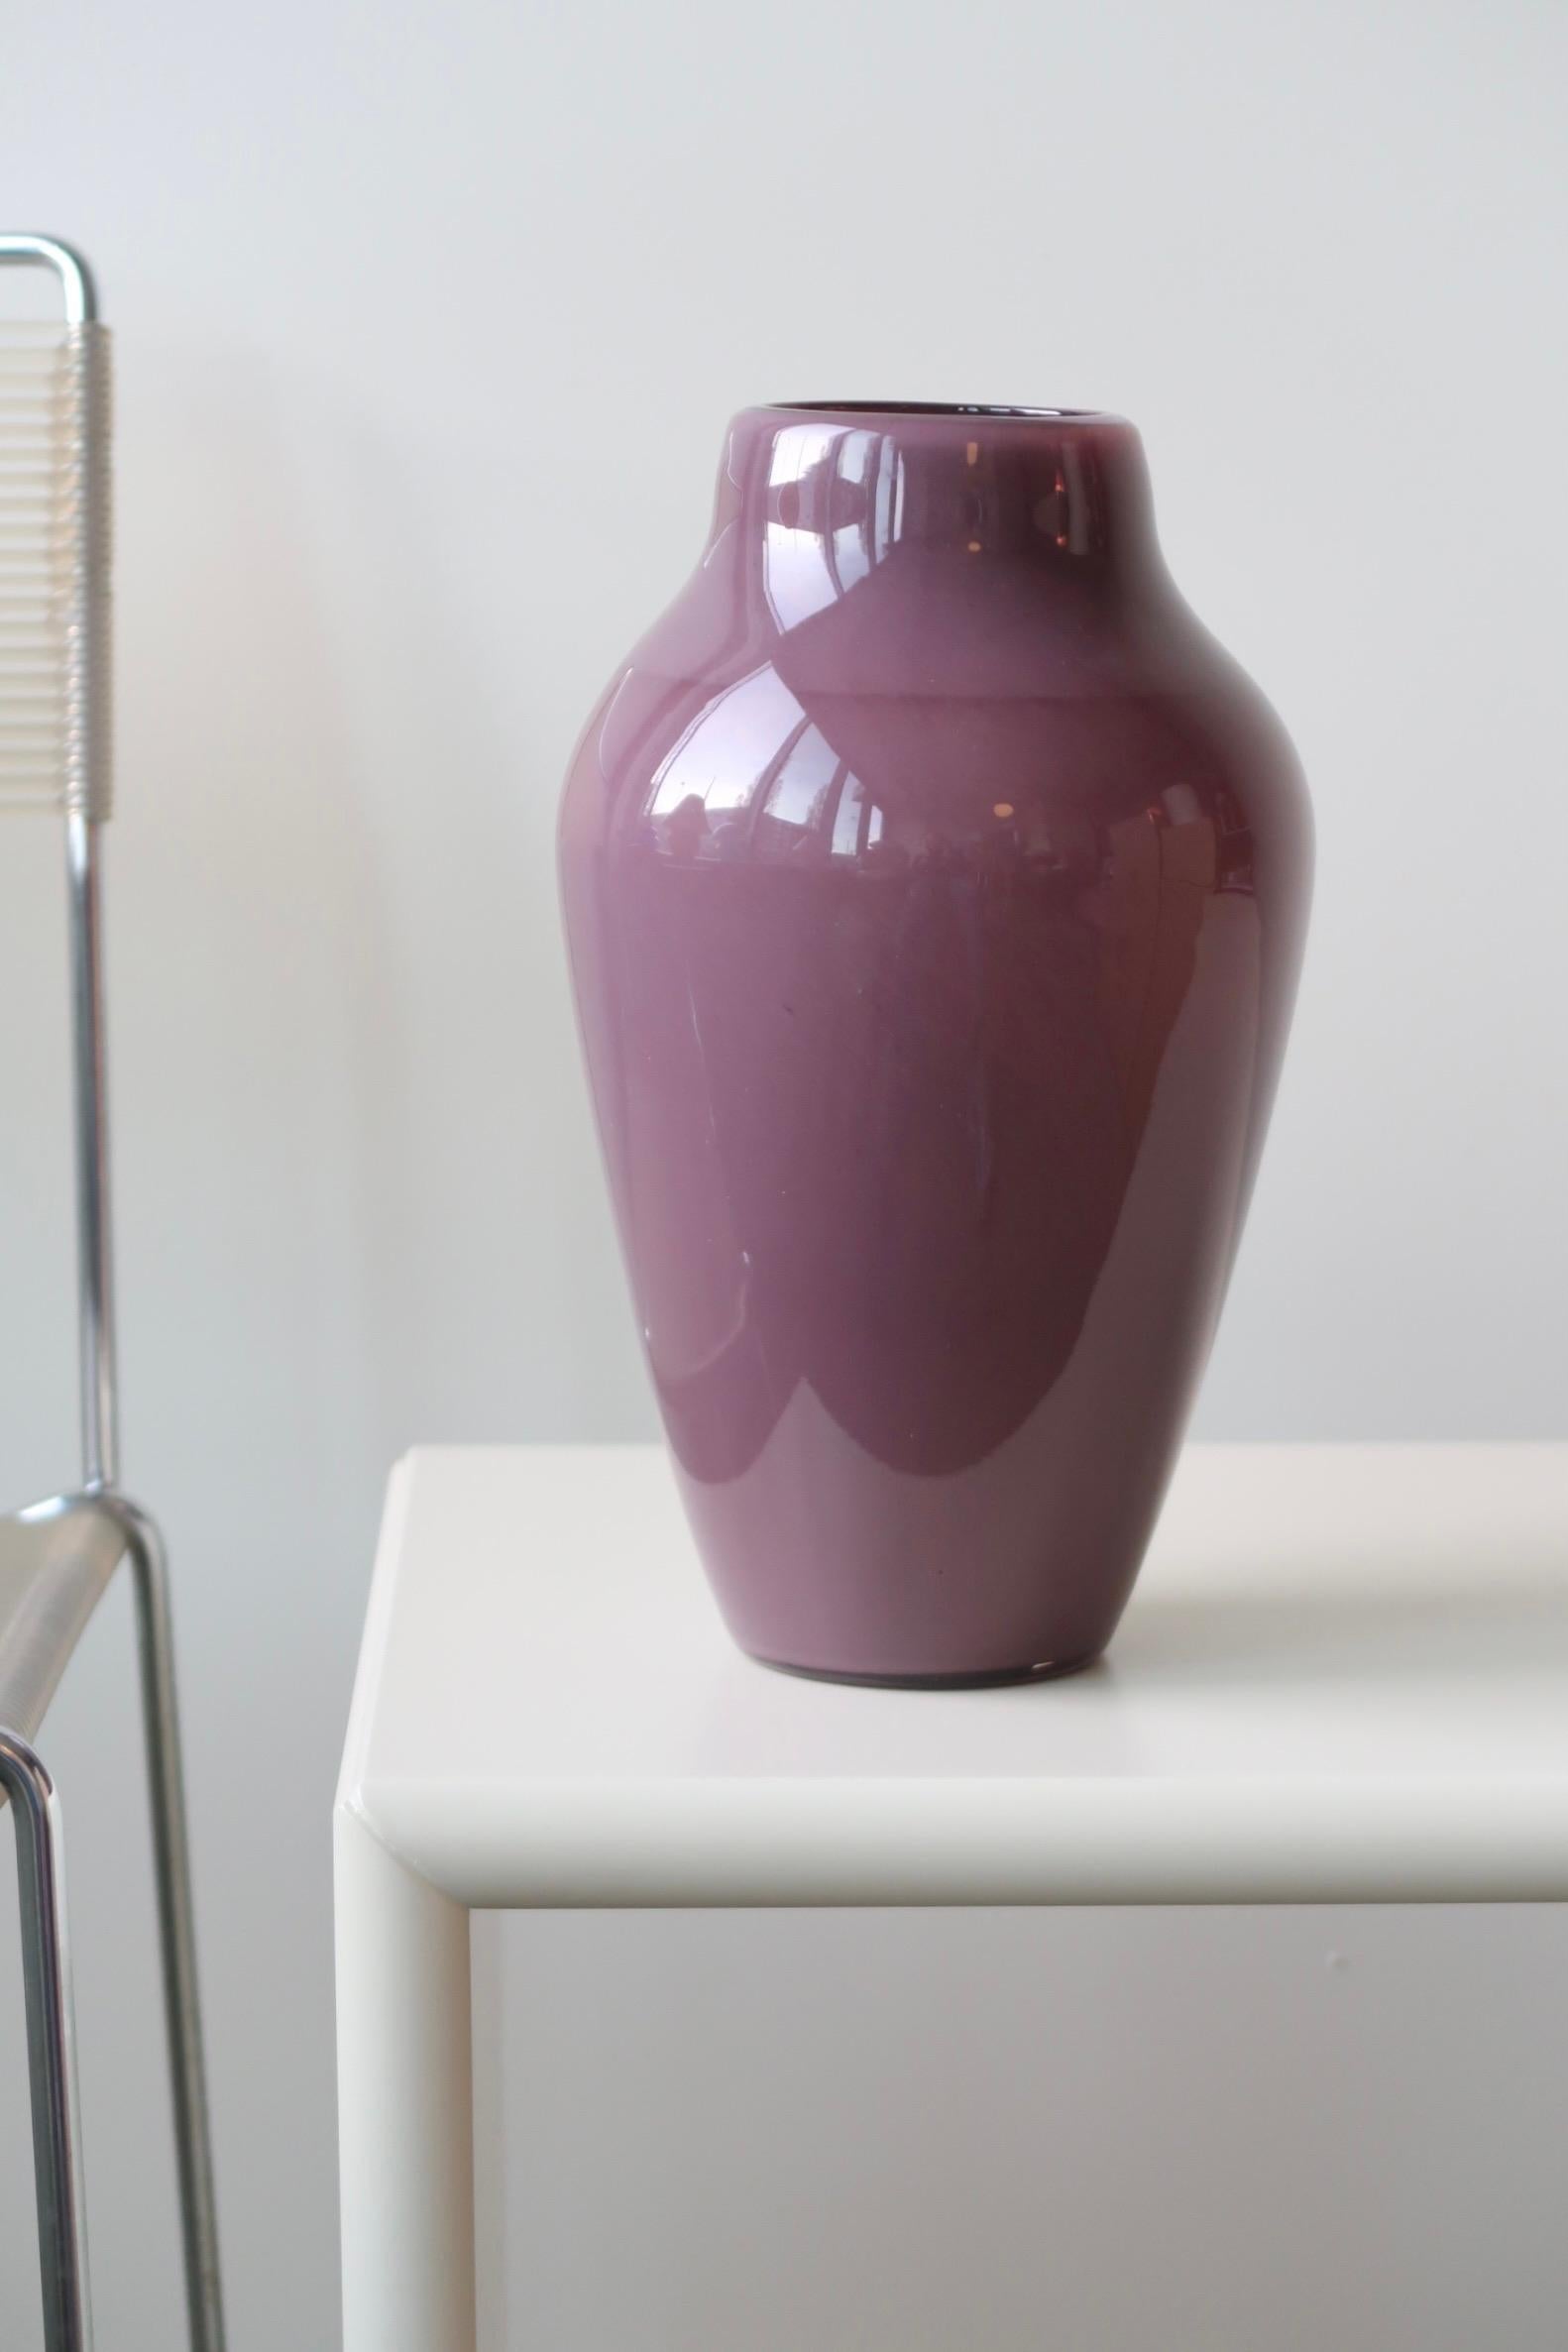 Vintage Murano glass vase in a beautiful shade of purple. Mouth-blown in a classic shape. Handmade in Italy, 1970s.

Measures: H:30 cm D:18 cm